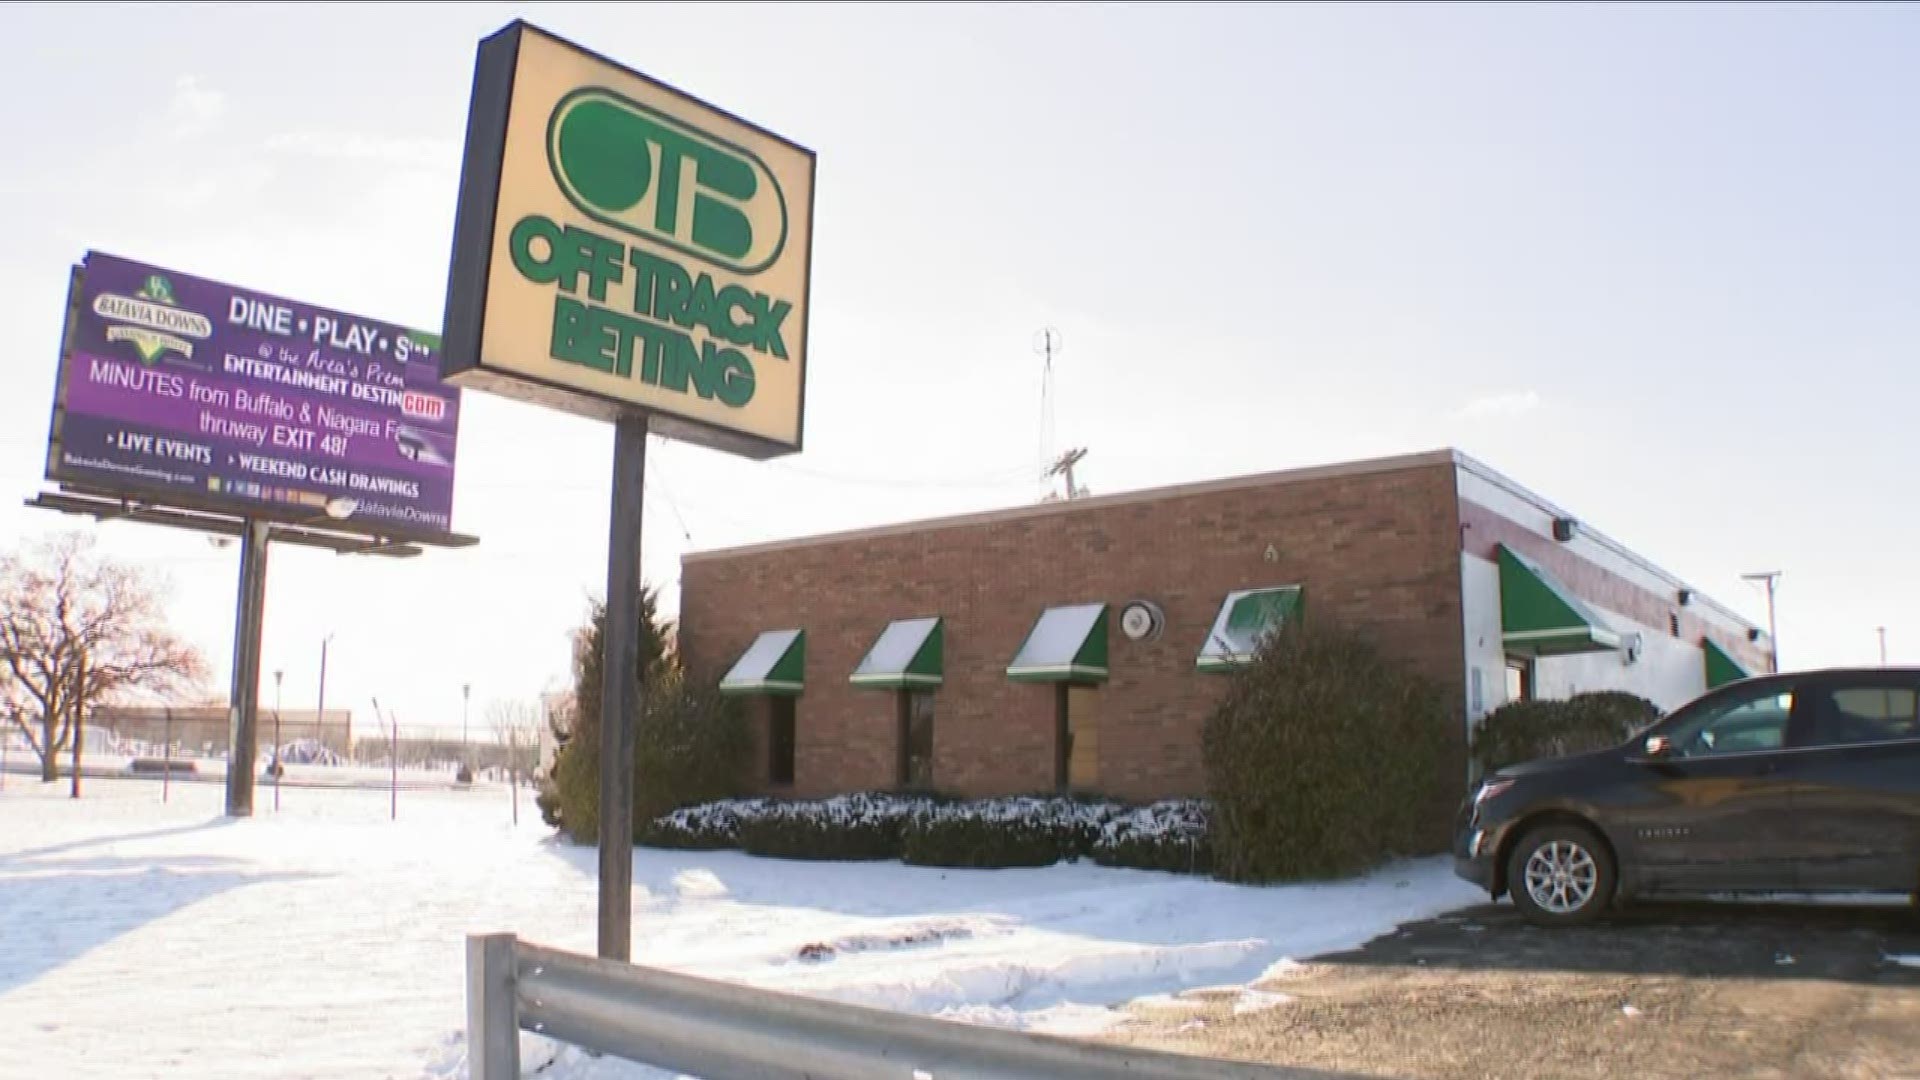 The local OTB is under FBI investigation. Now we are hearing from the attorney of a senior OTB manager who says his client is being punished for cooperating with FBI